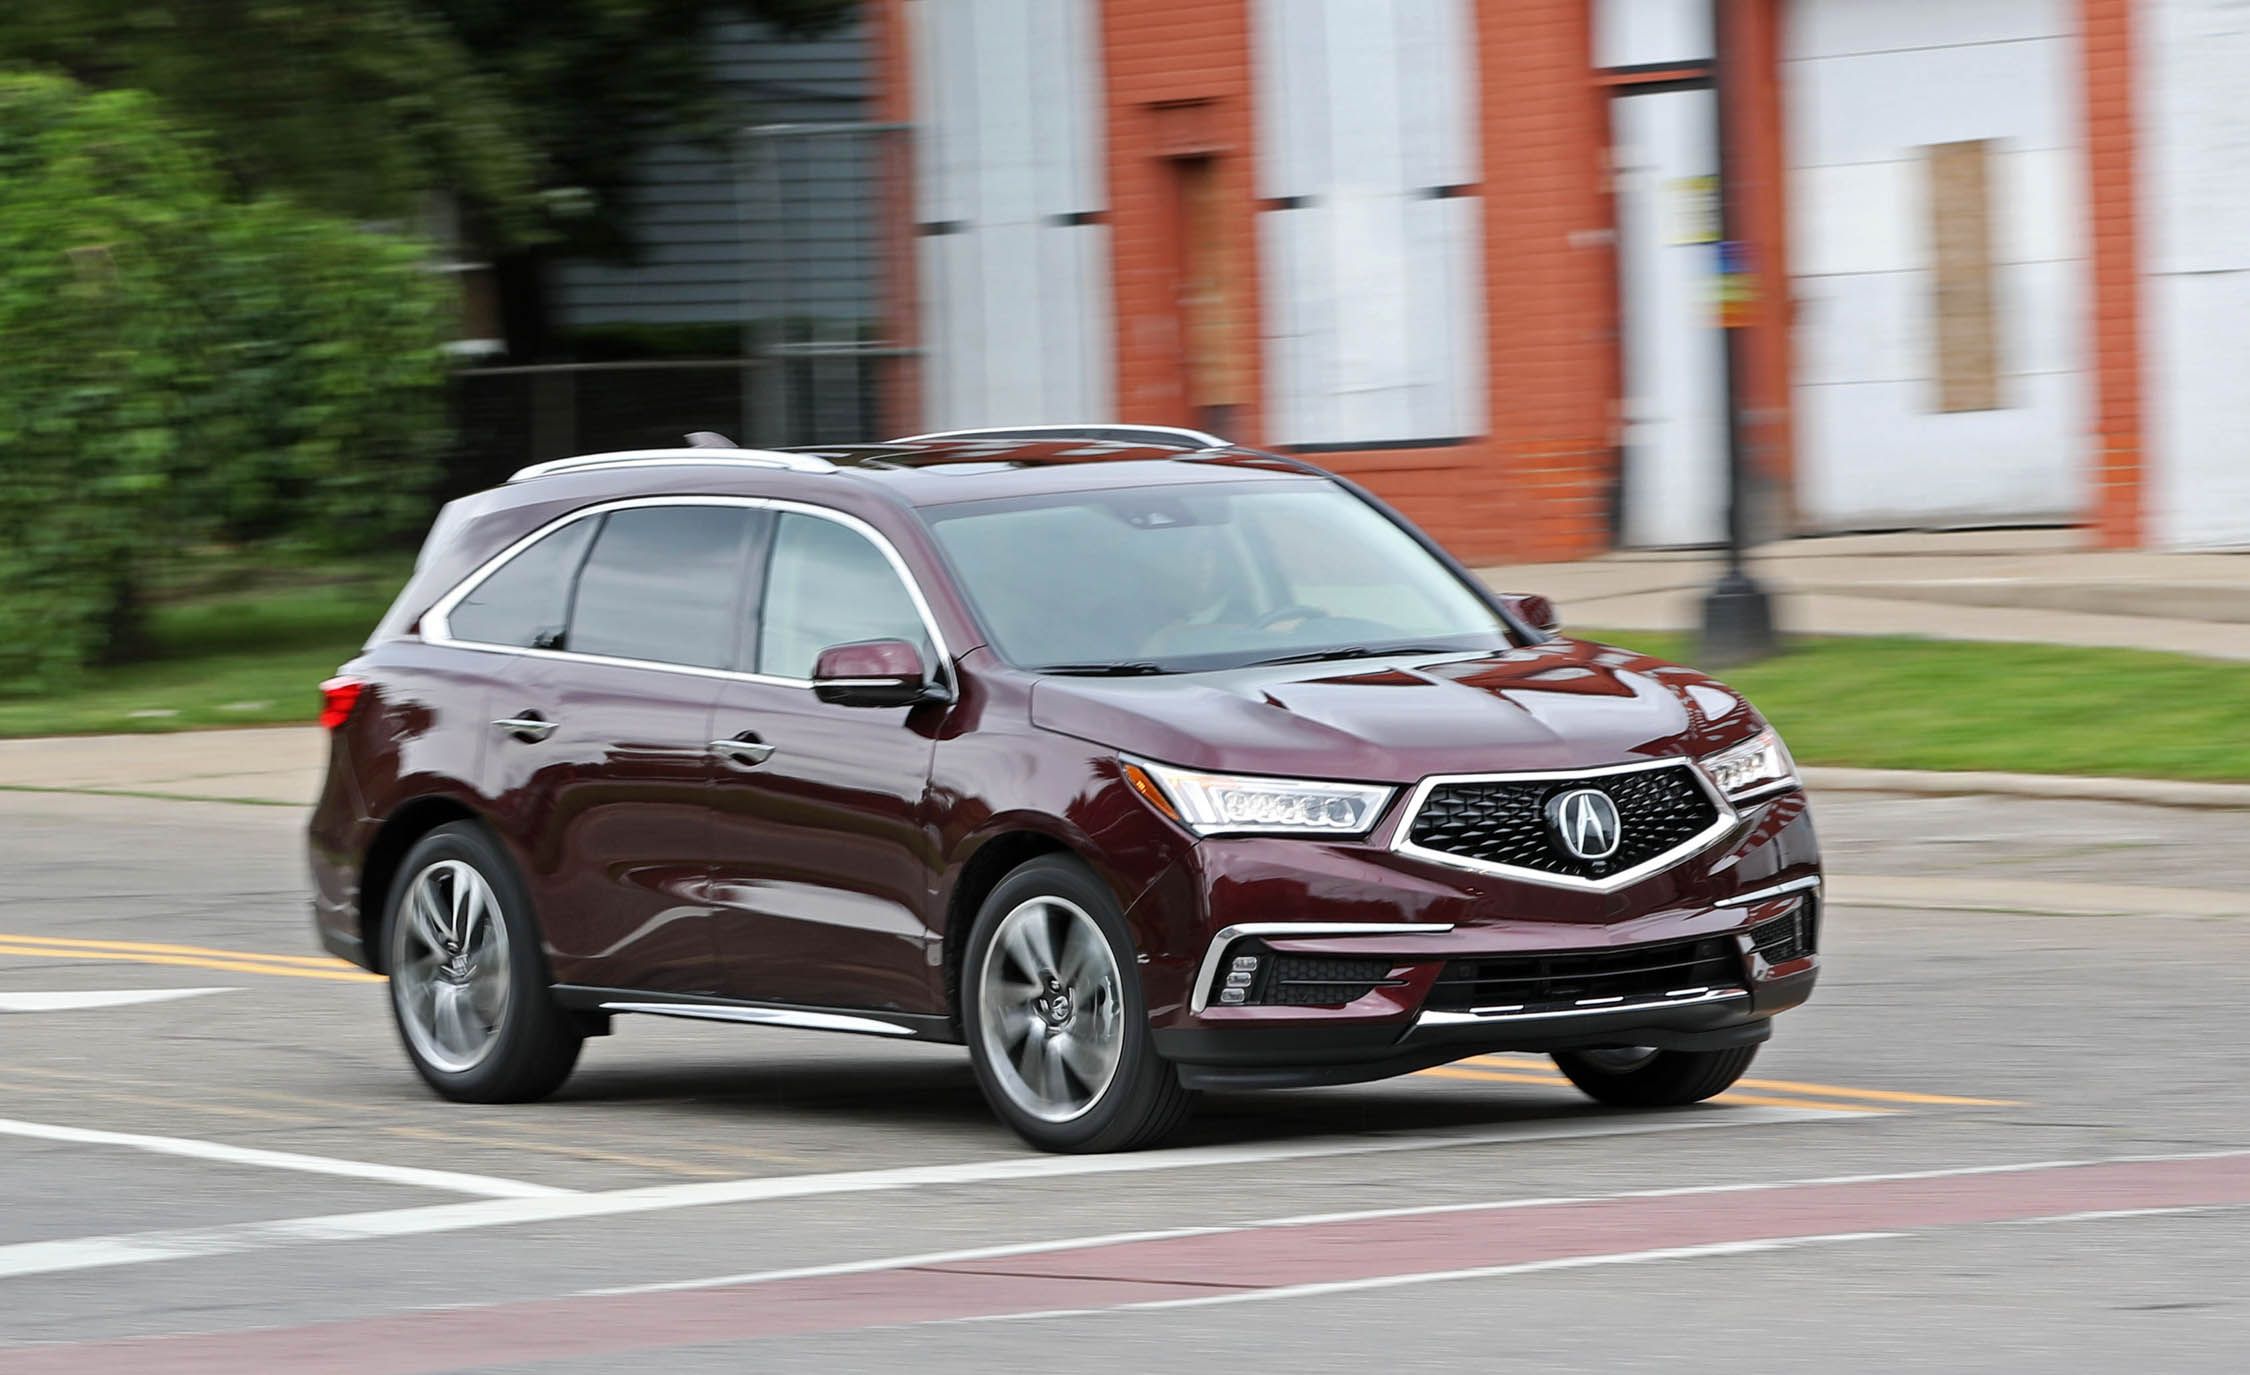 2017 Acura Mdx Test Drive Front And Side View (Photo 7 of 22)